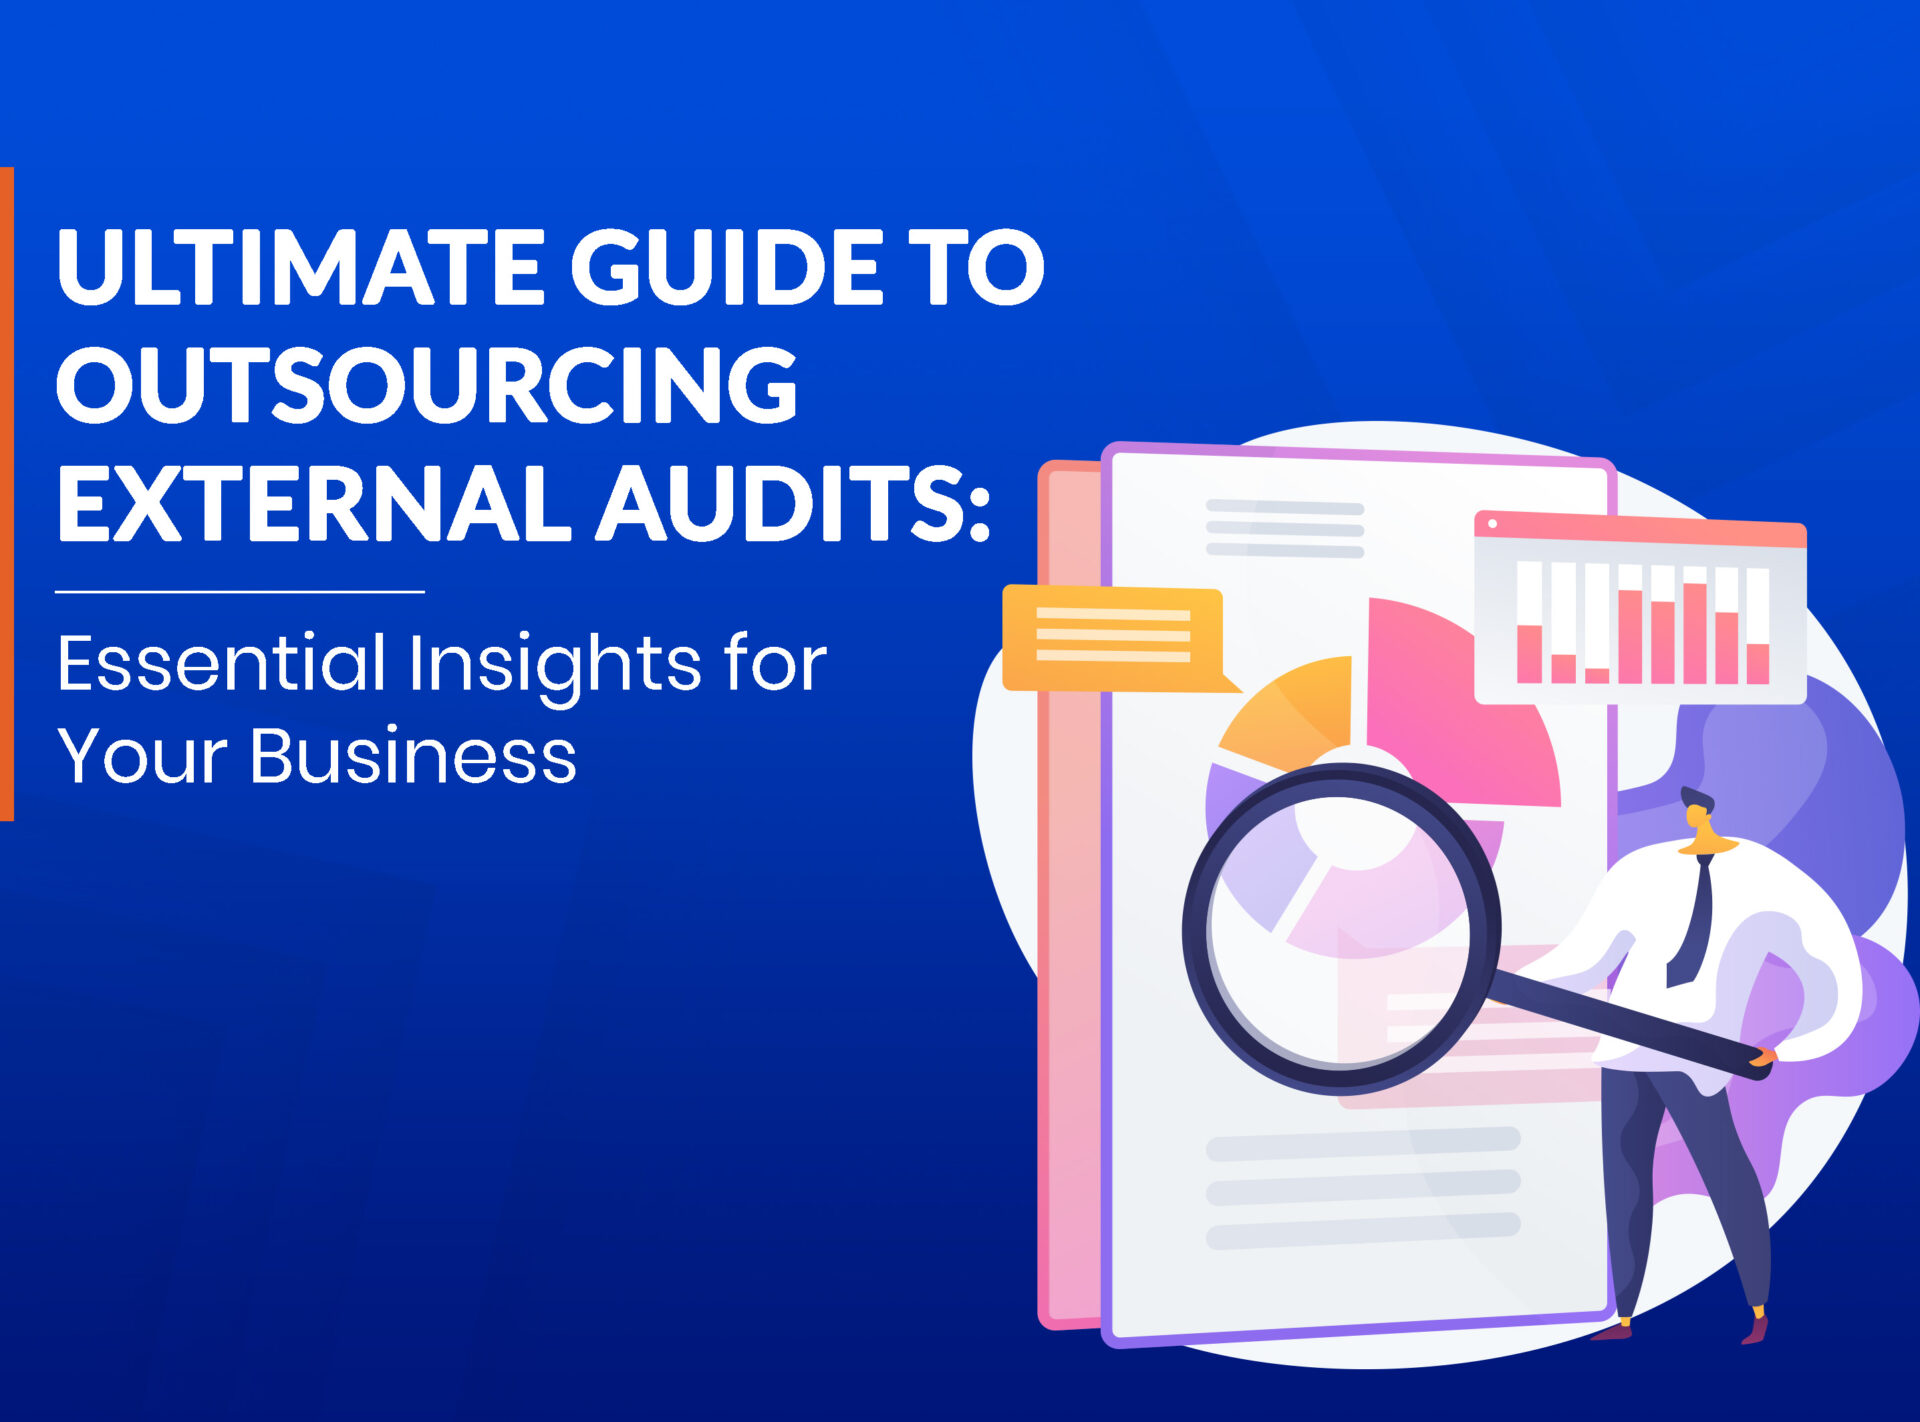 Ultimate Guide to Outsourcing External Audits: Essential Insights for Your Business